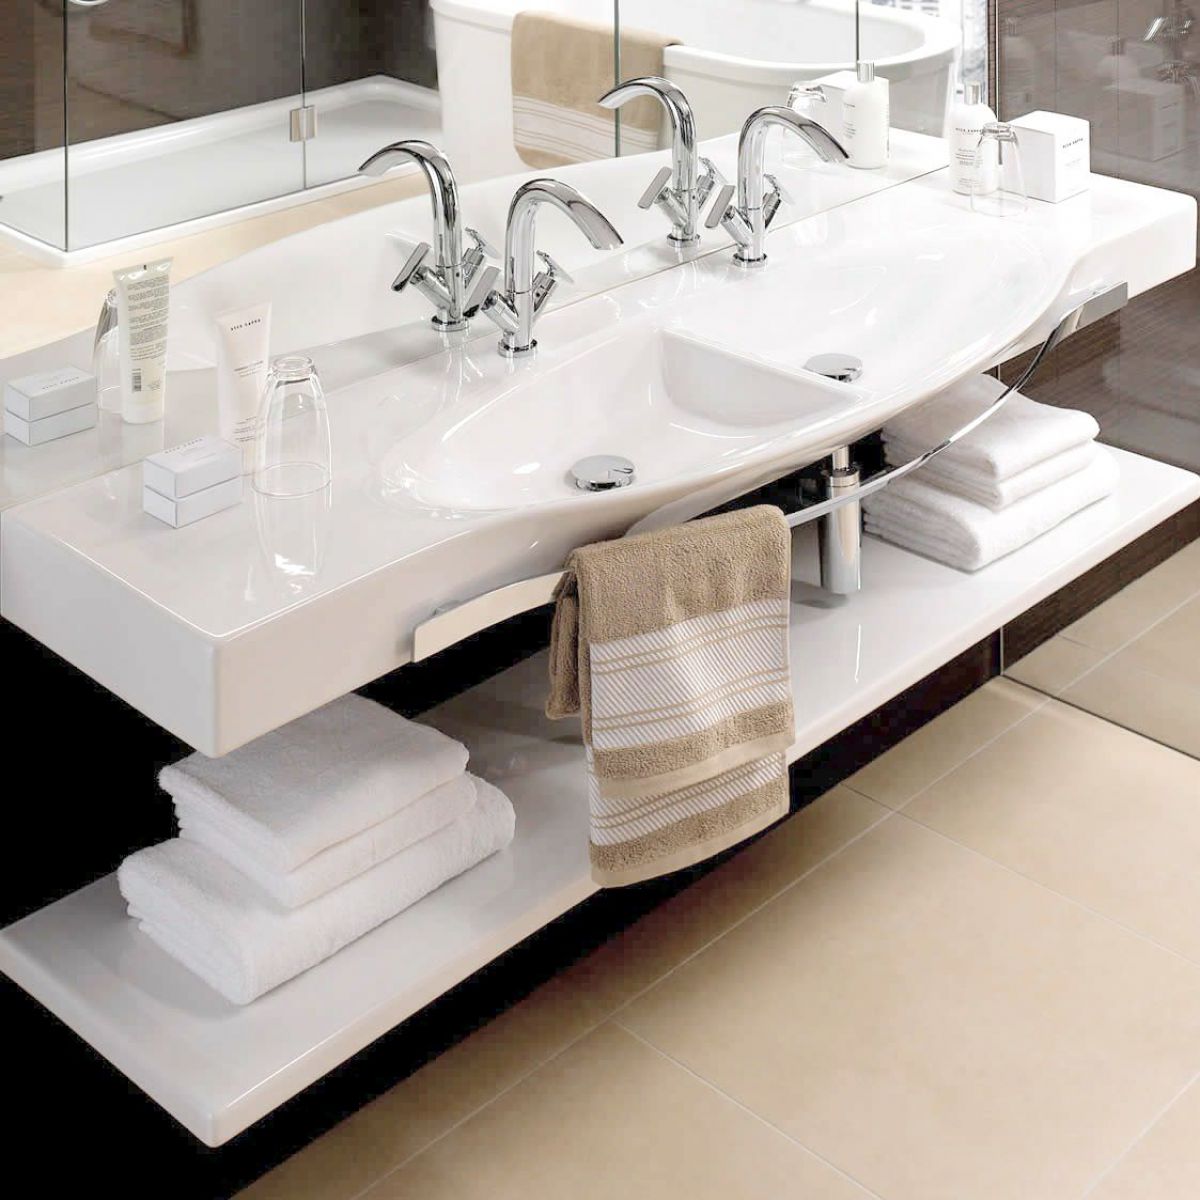 Laufen Palace Double Countertop Basin With Towel Rail Uk Bathrooms